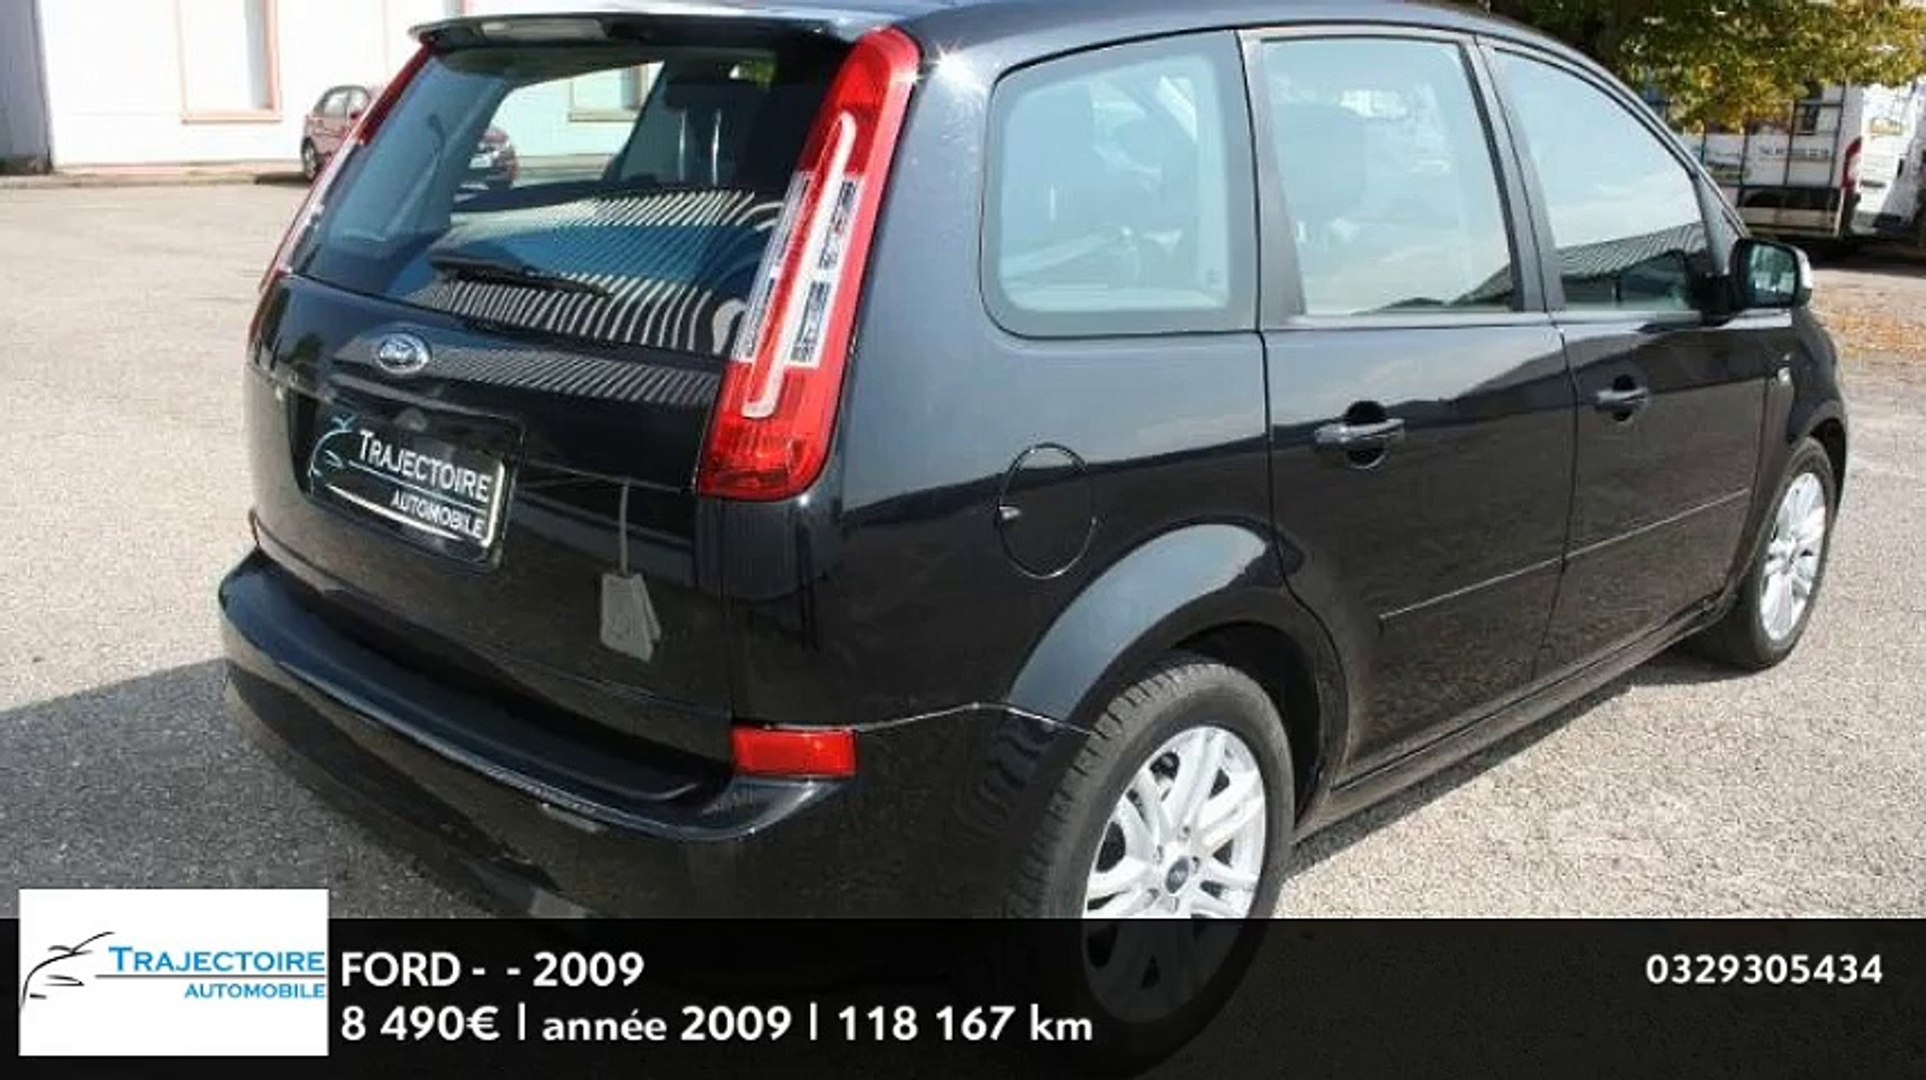 Annonce Occasion FORD C-MAX 1.6 TDCi110 DPF Ghia 2009 - Vidéo Dailymotion